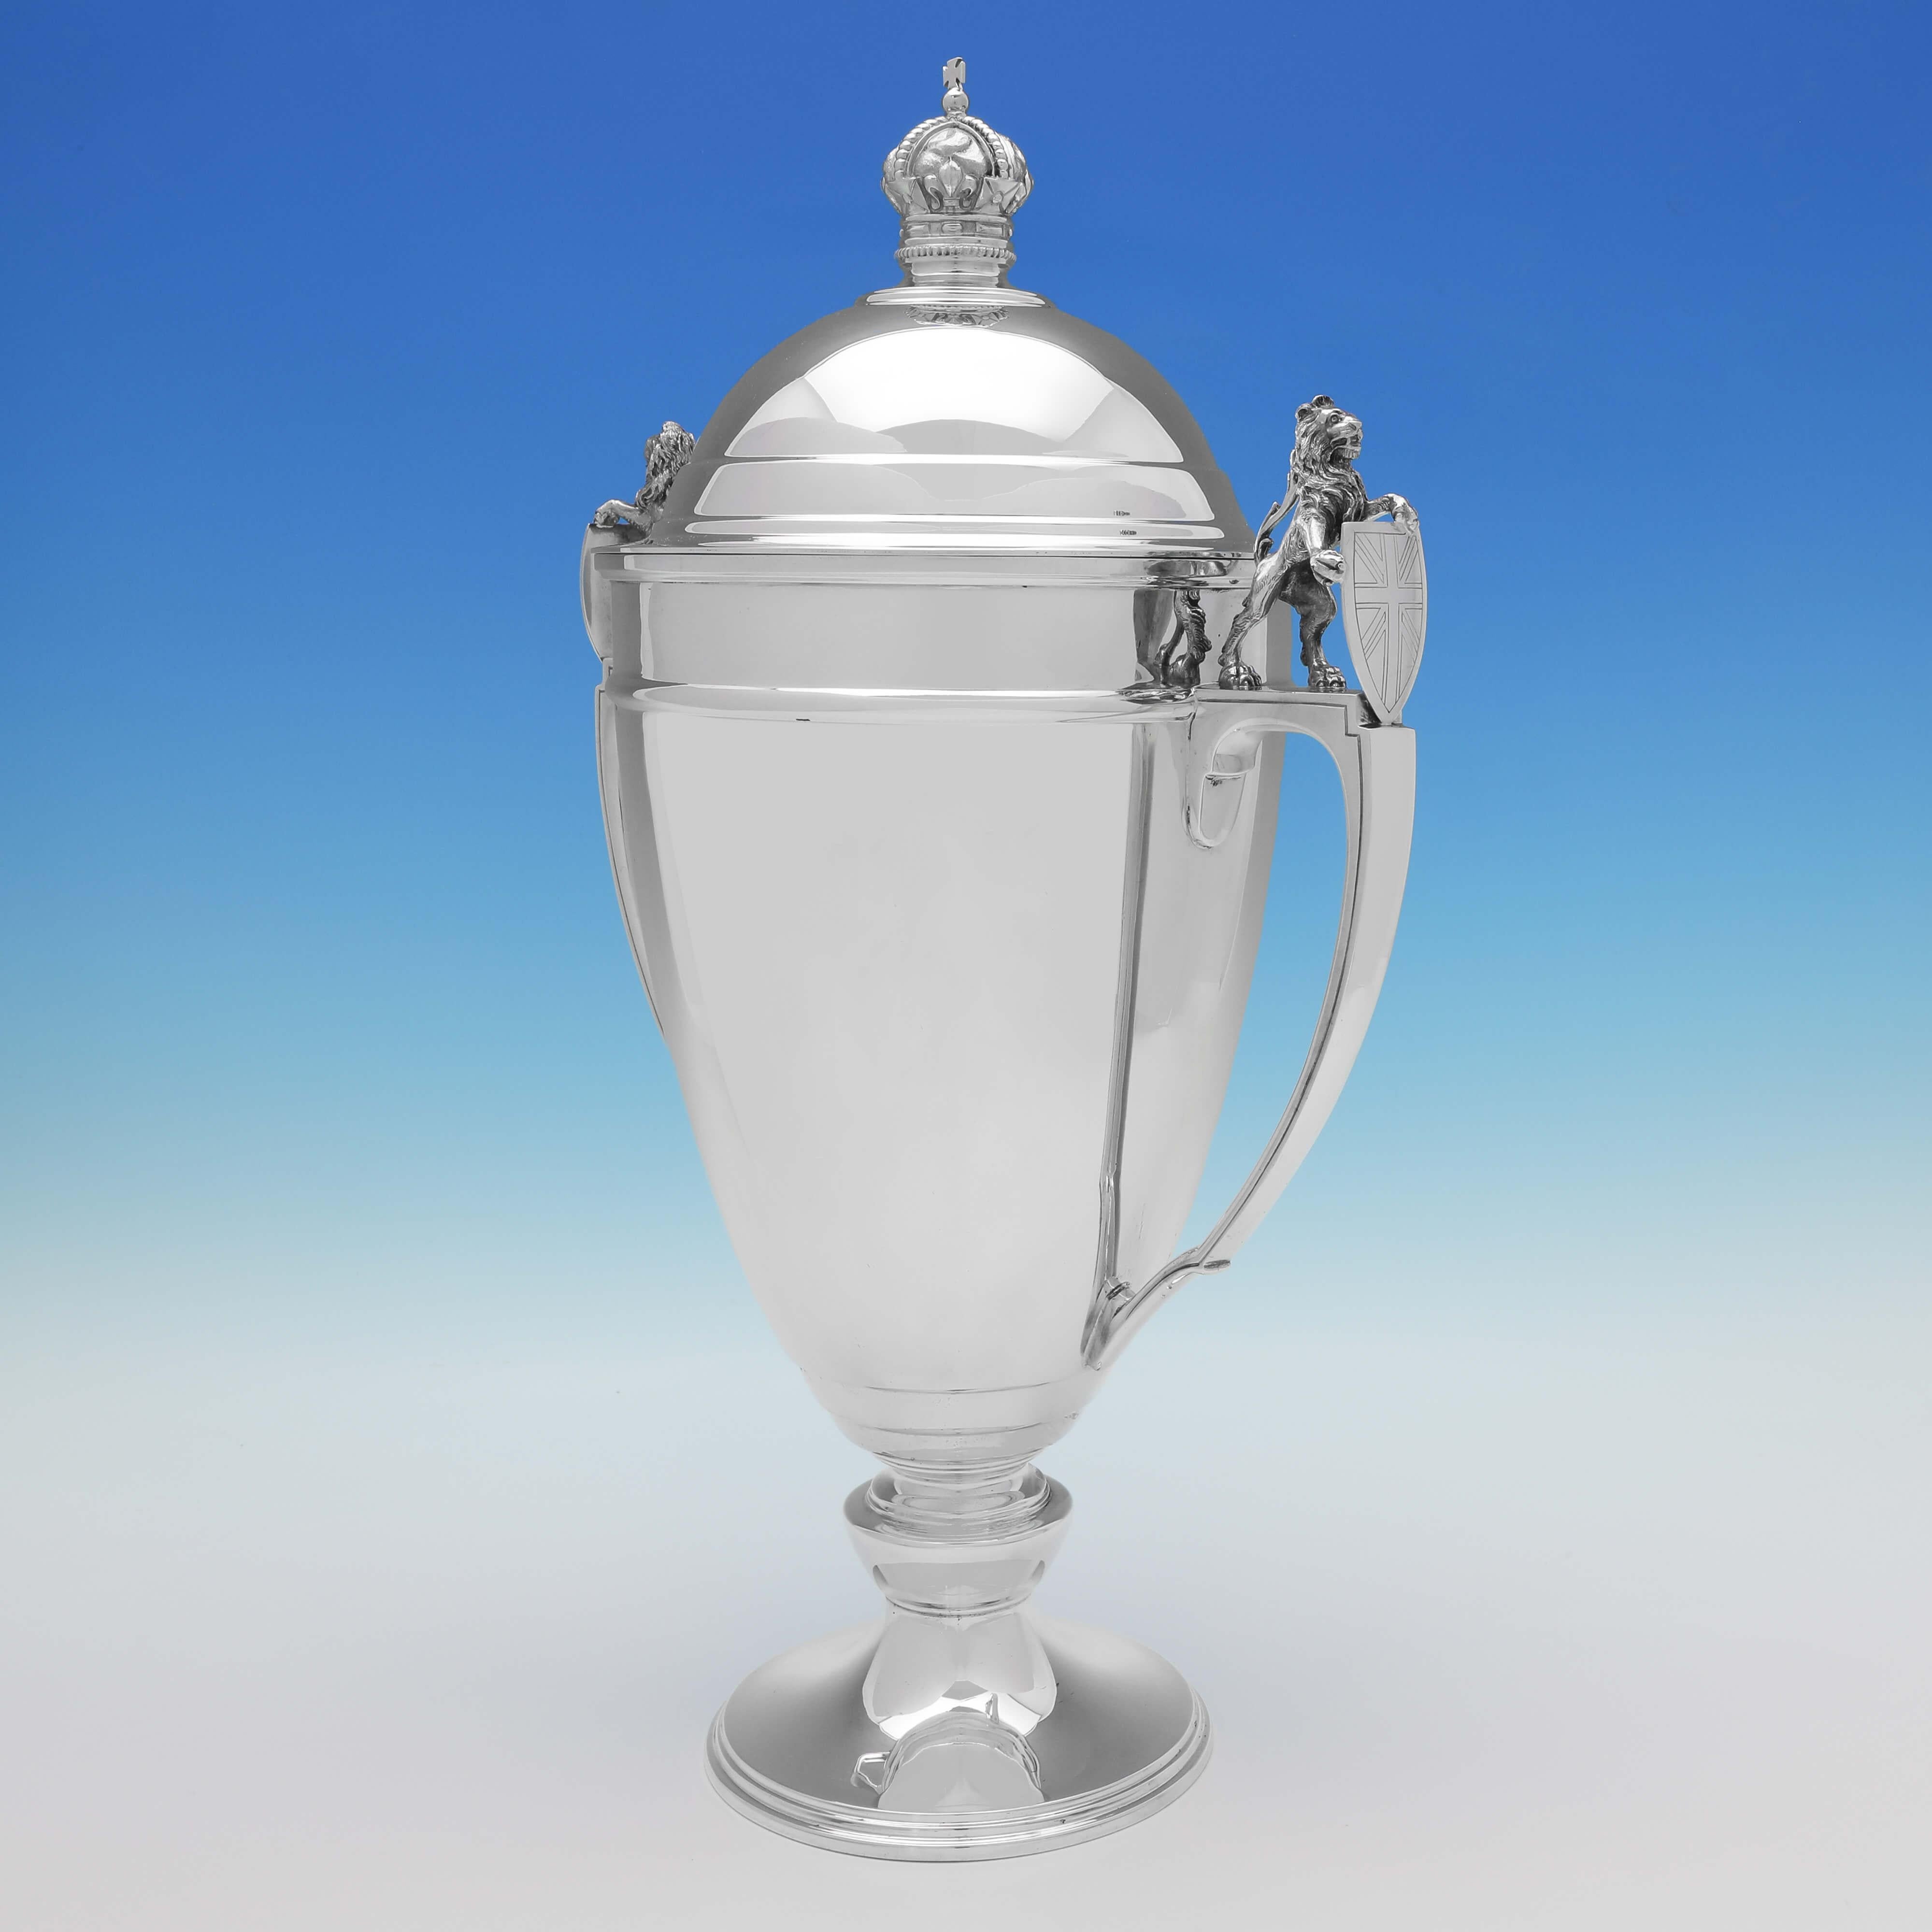 Hallmarked in Sheffield in 1937 by Mappin & Webb, this striking, Sterling Silver Cup & Cover, is in the Art Deco taste, and features models of rampant lions holding shields with the engraved Union Jack to each handle, and a crown finial. The cup &